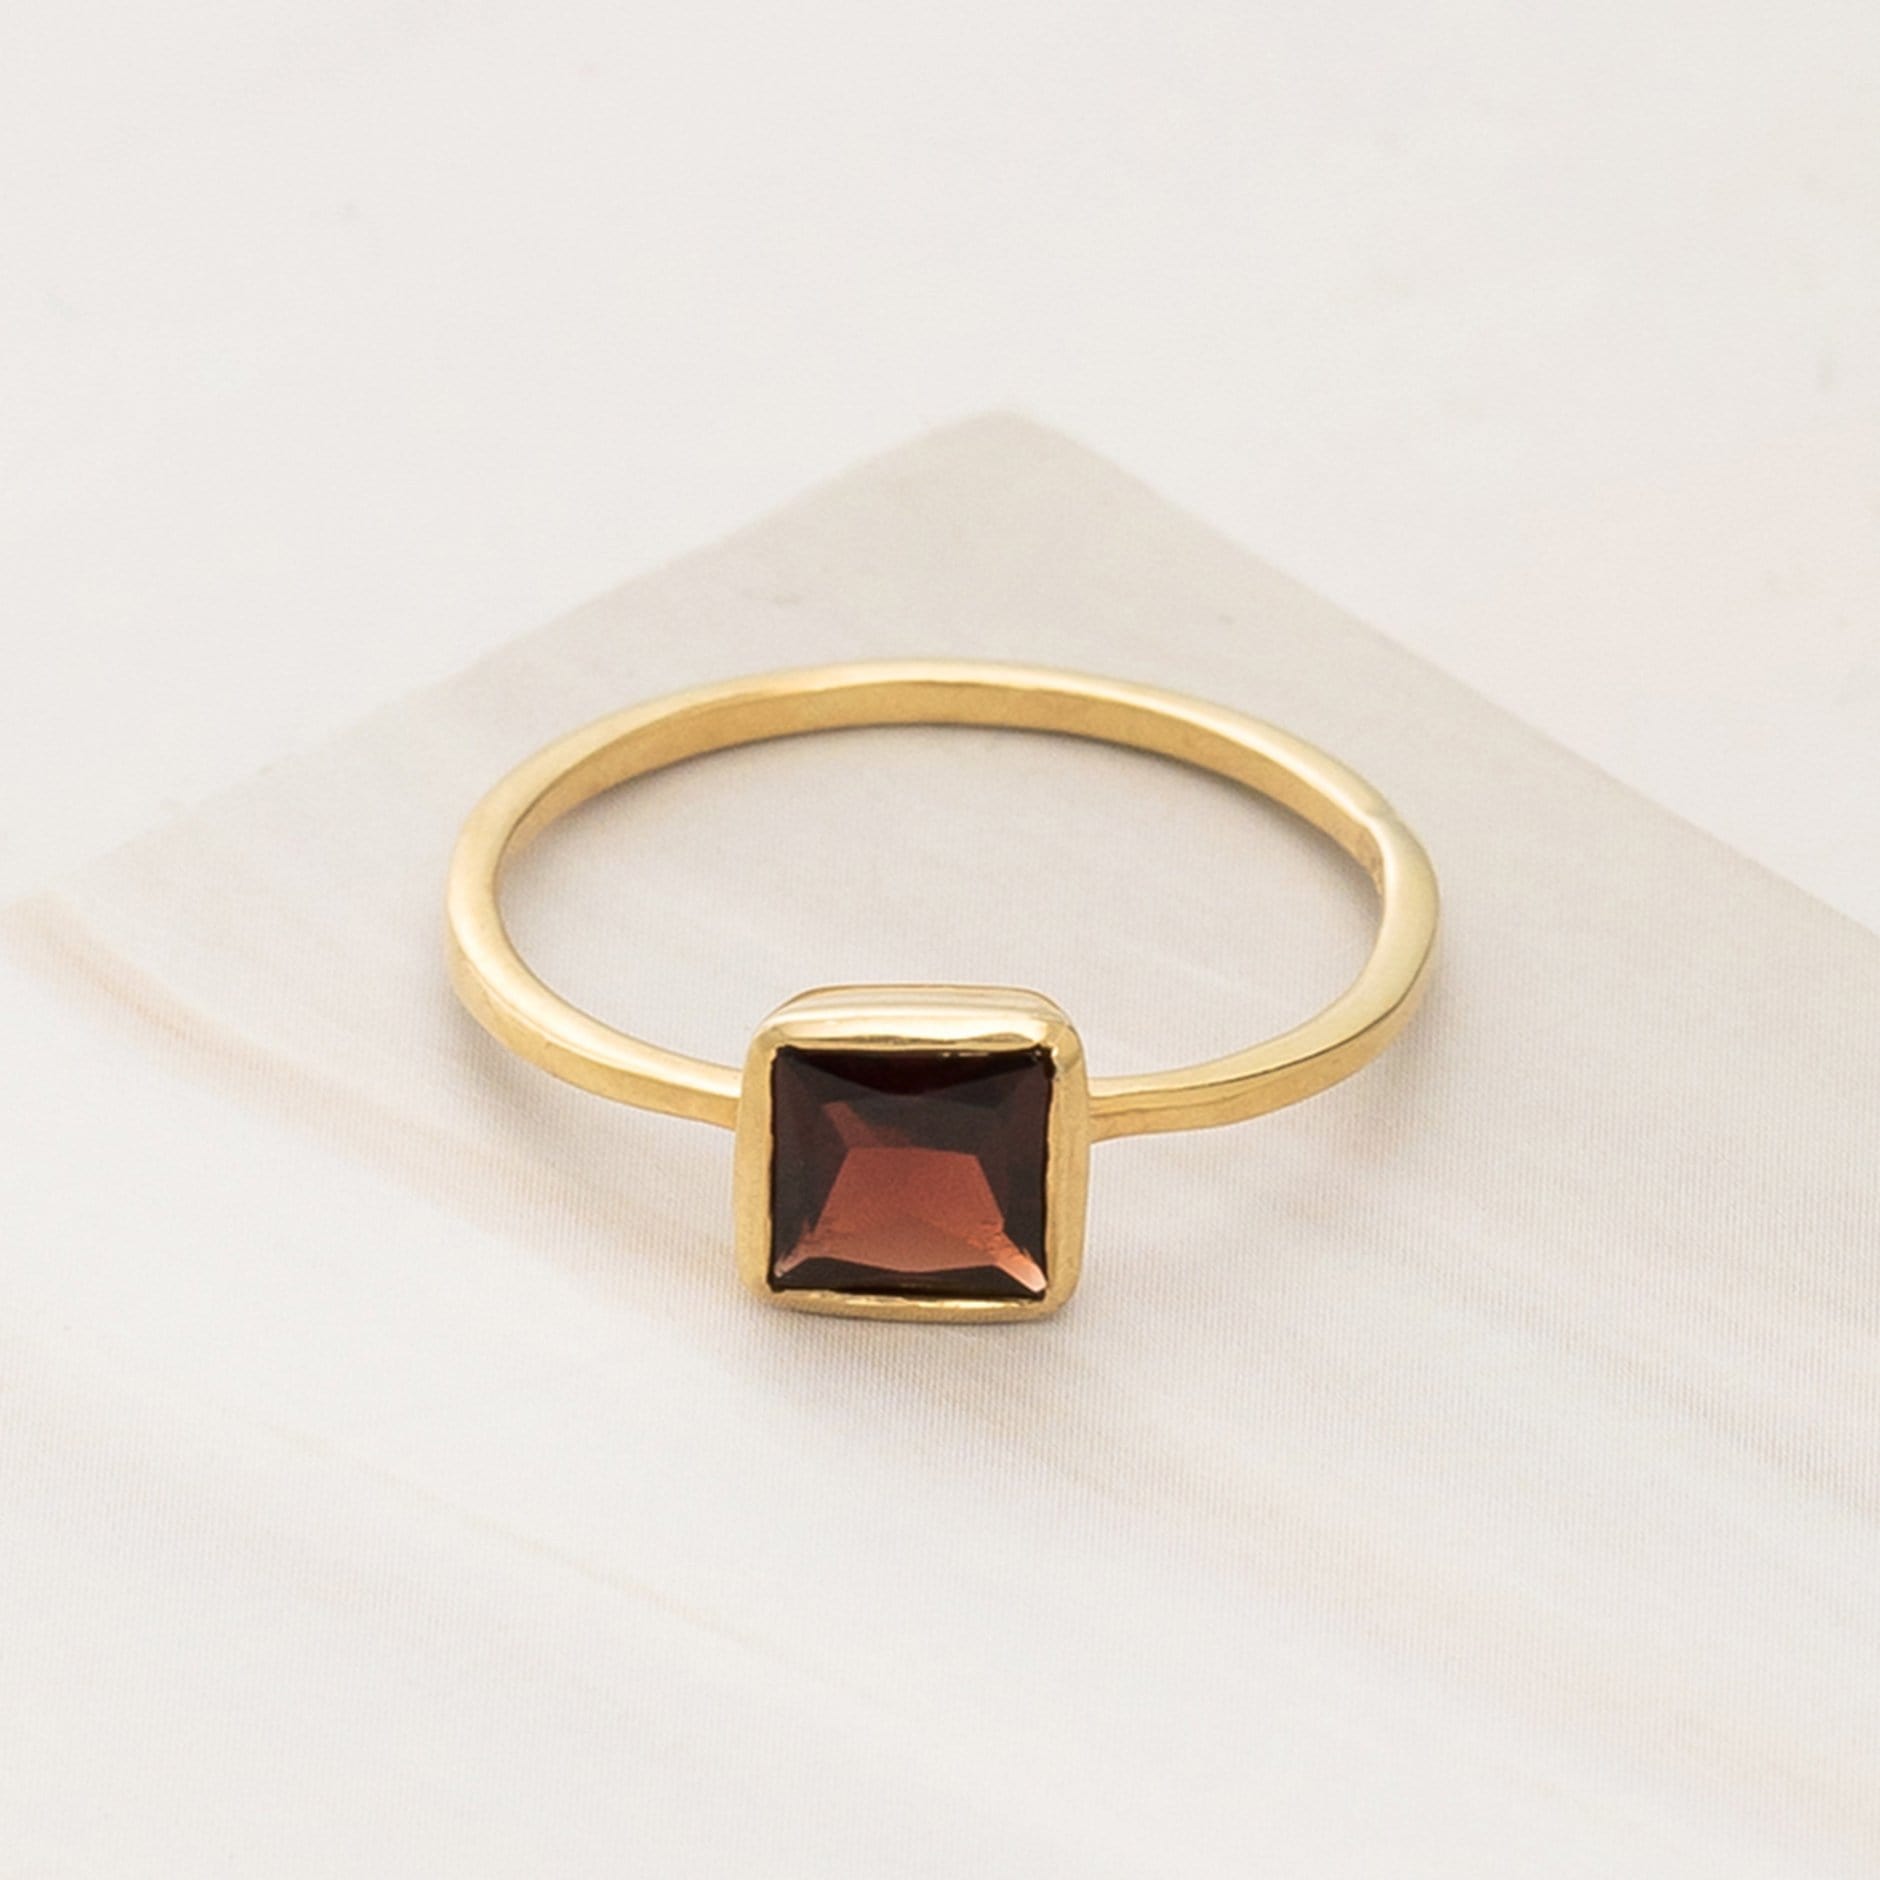 Emblem Jewelry Rings Red Garnet / Square Signature Candy Gemstone Stack Rings (Ring Size 4)